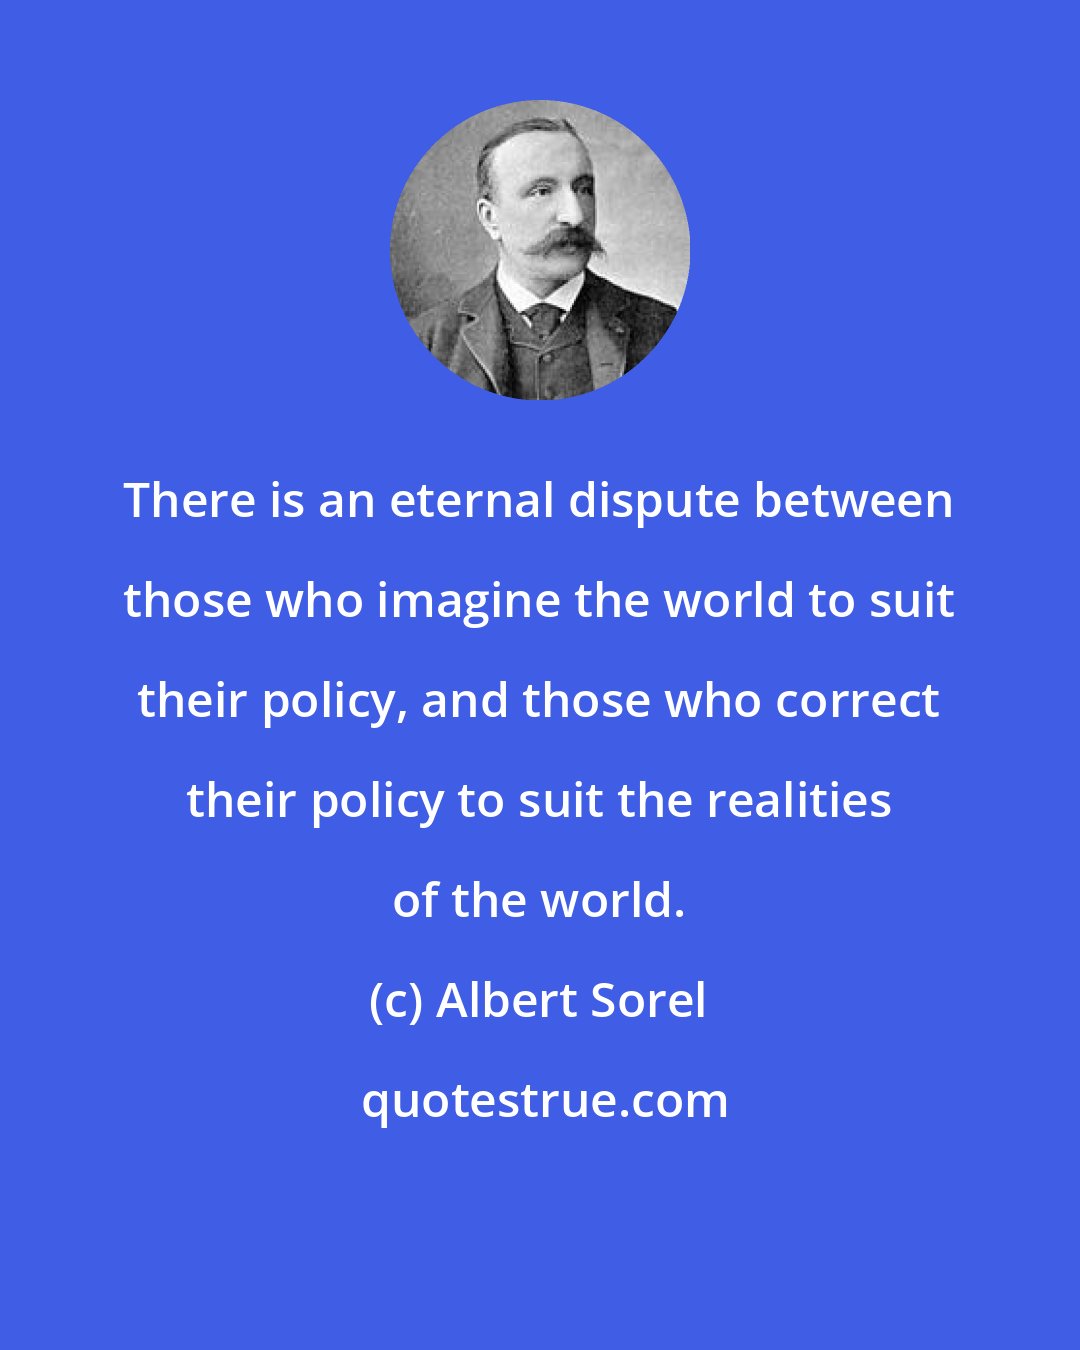 Albert Sorel: There is an eternal dispute between those who imagine the world to suit their policy, and those who correct their policy to suit the realities of the world.